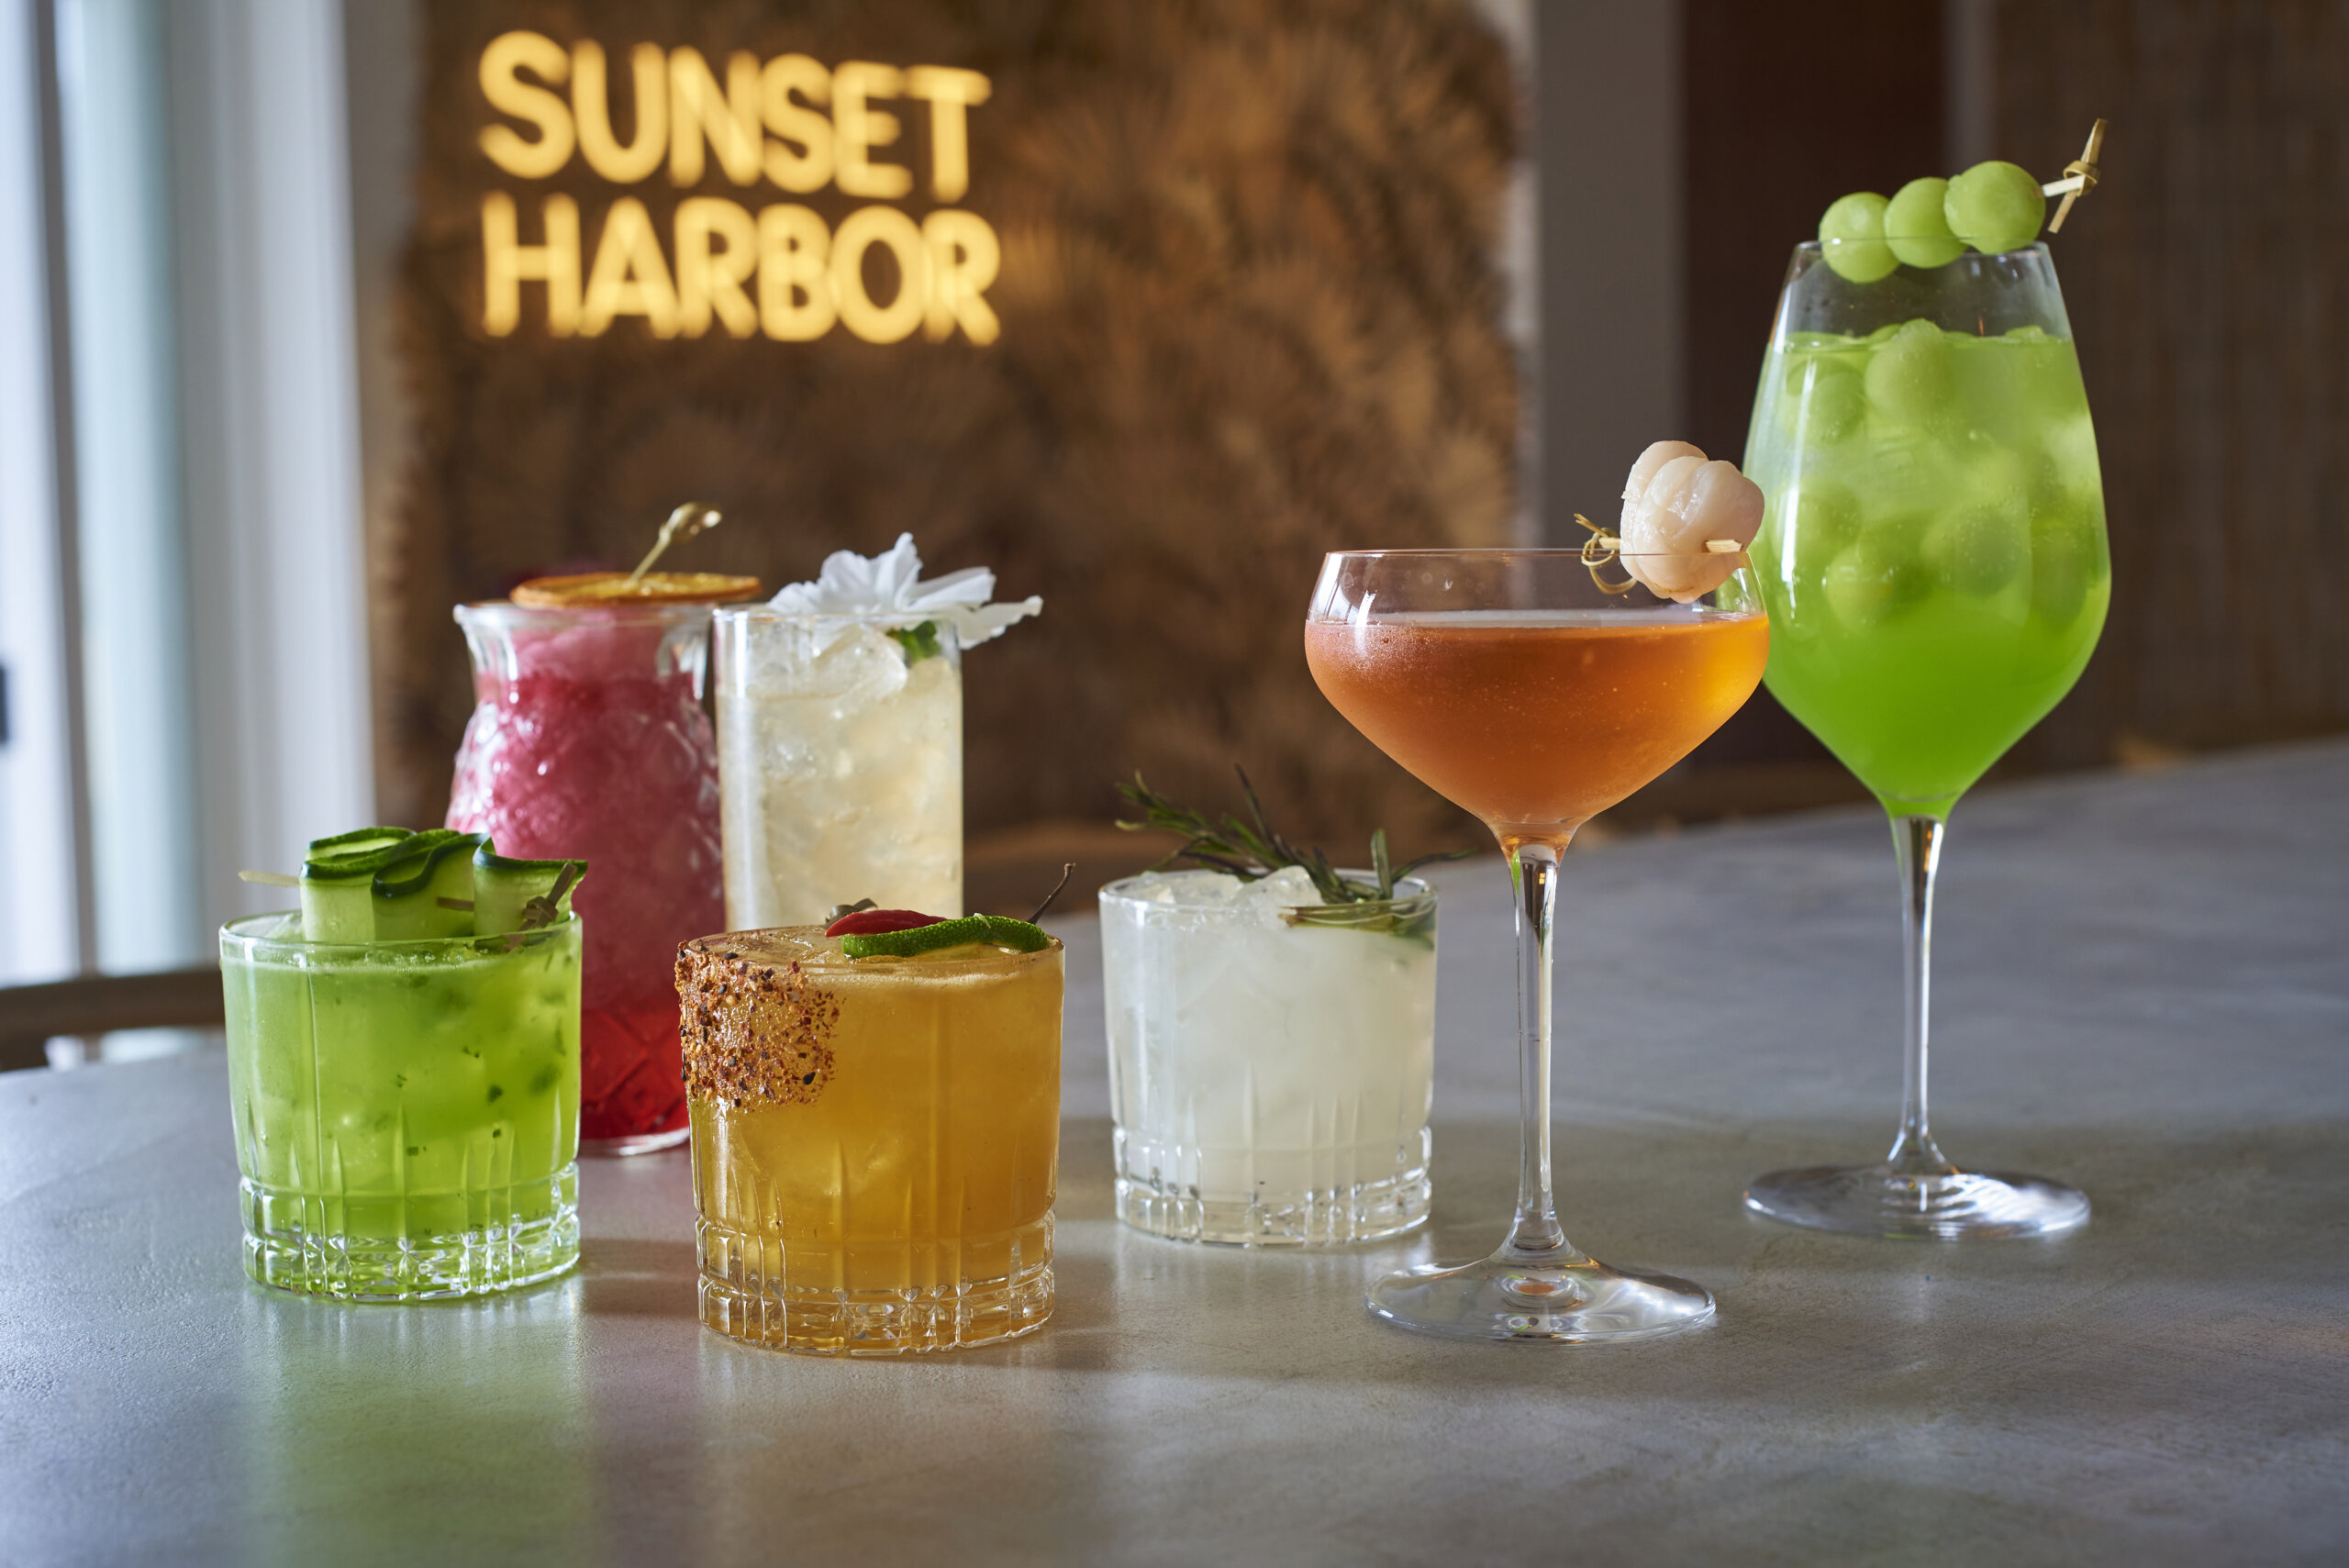 Sunset Harbor is offering cocktail specials this summer.